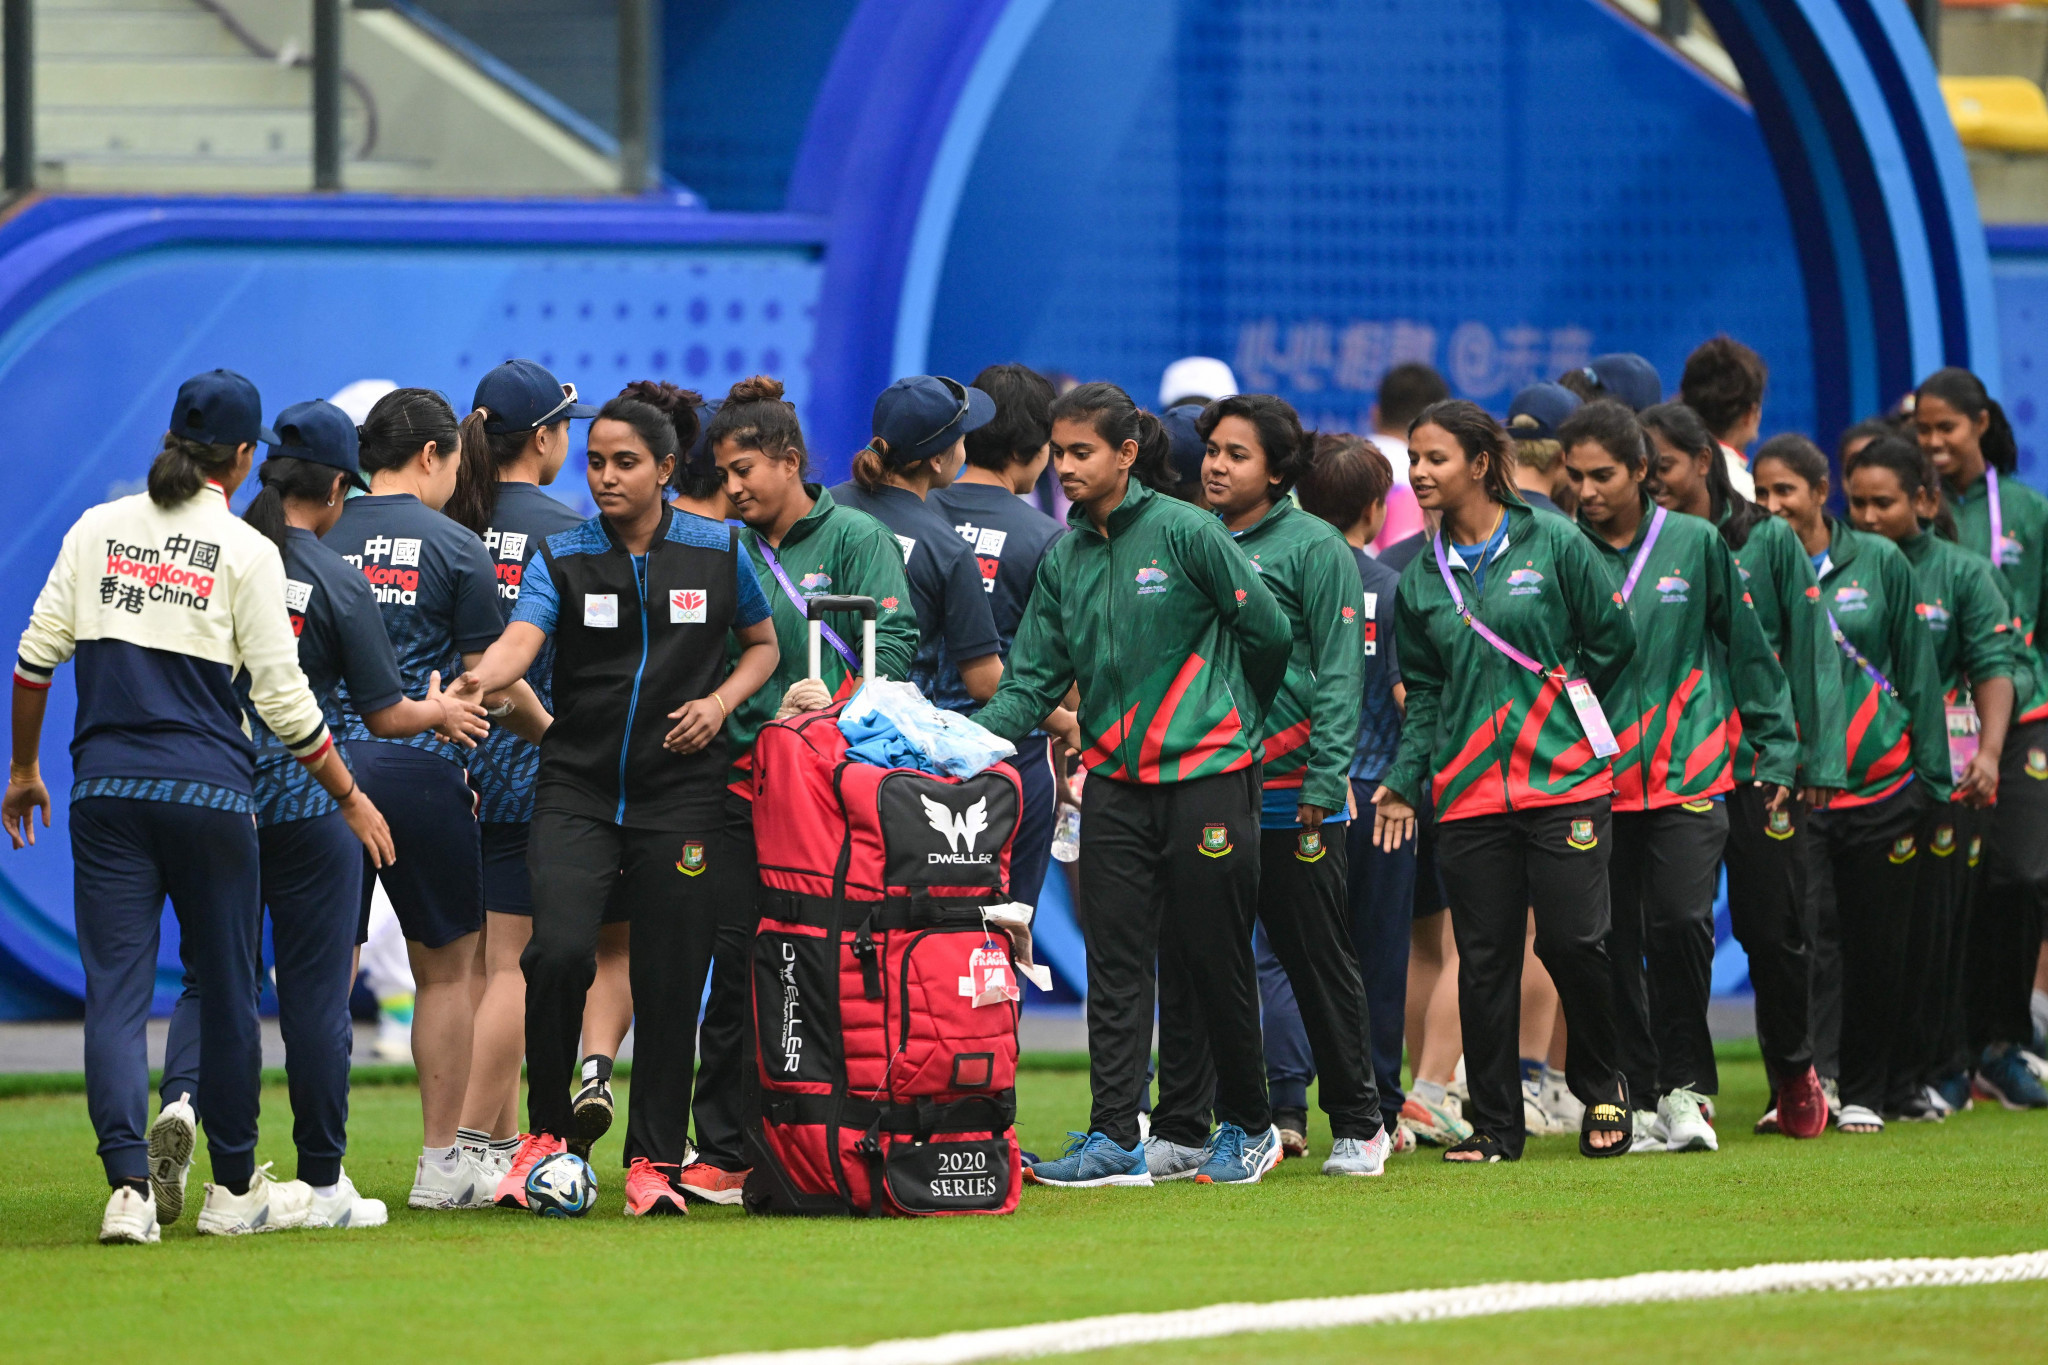 Bangladesh prepared to face Hong Kong in a hotly-anticipated women's cricket quarter-final ©Getty Images